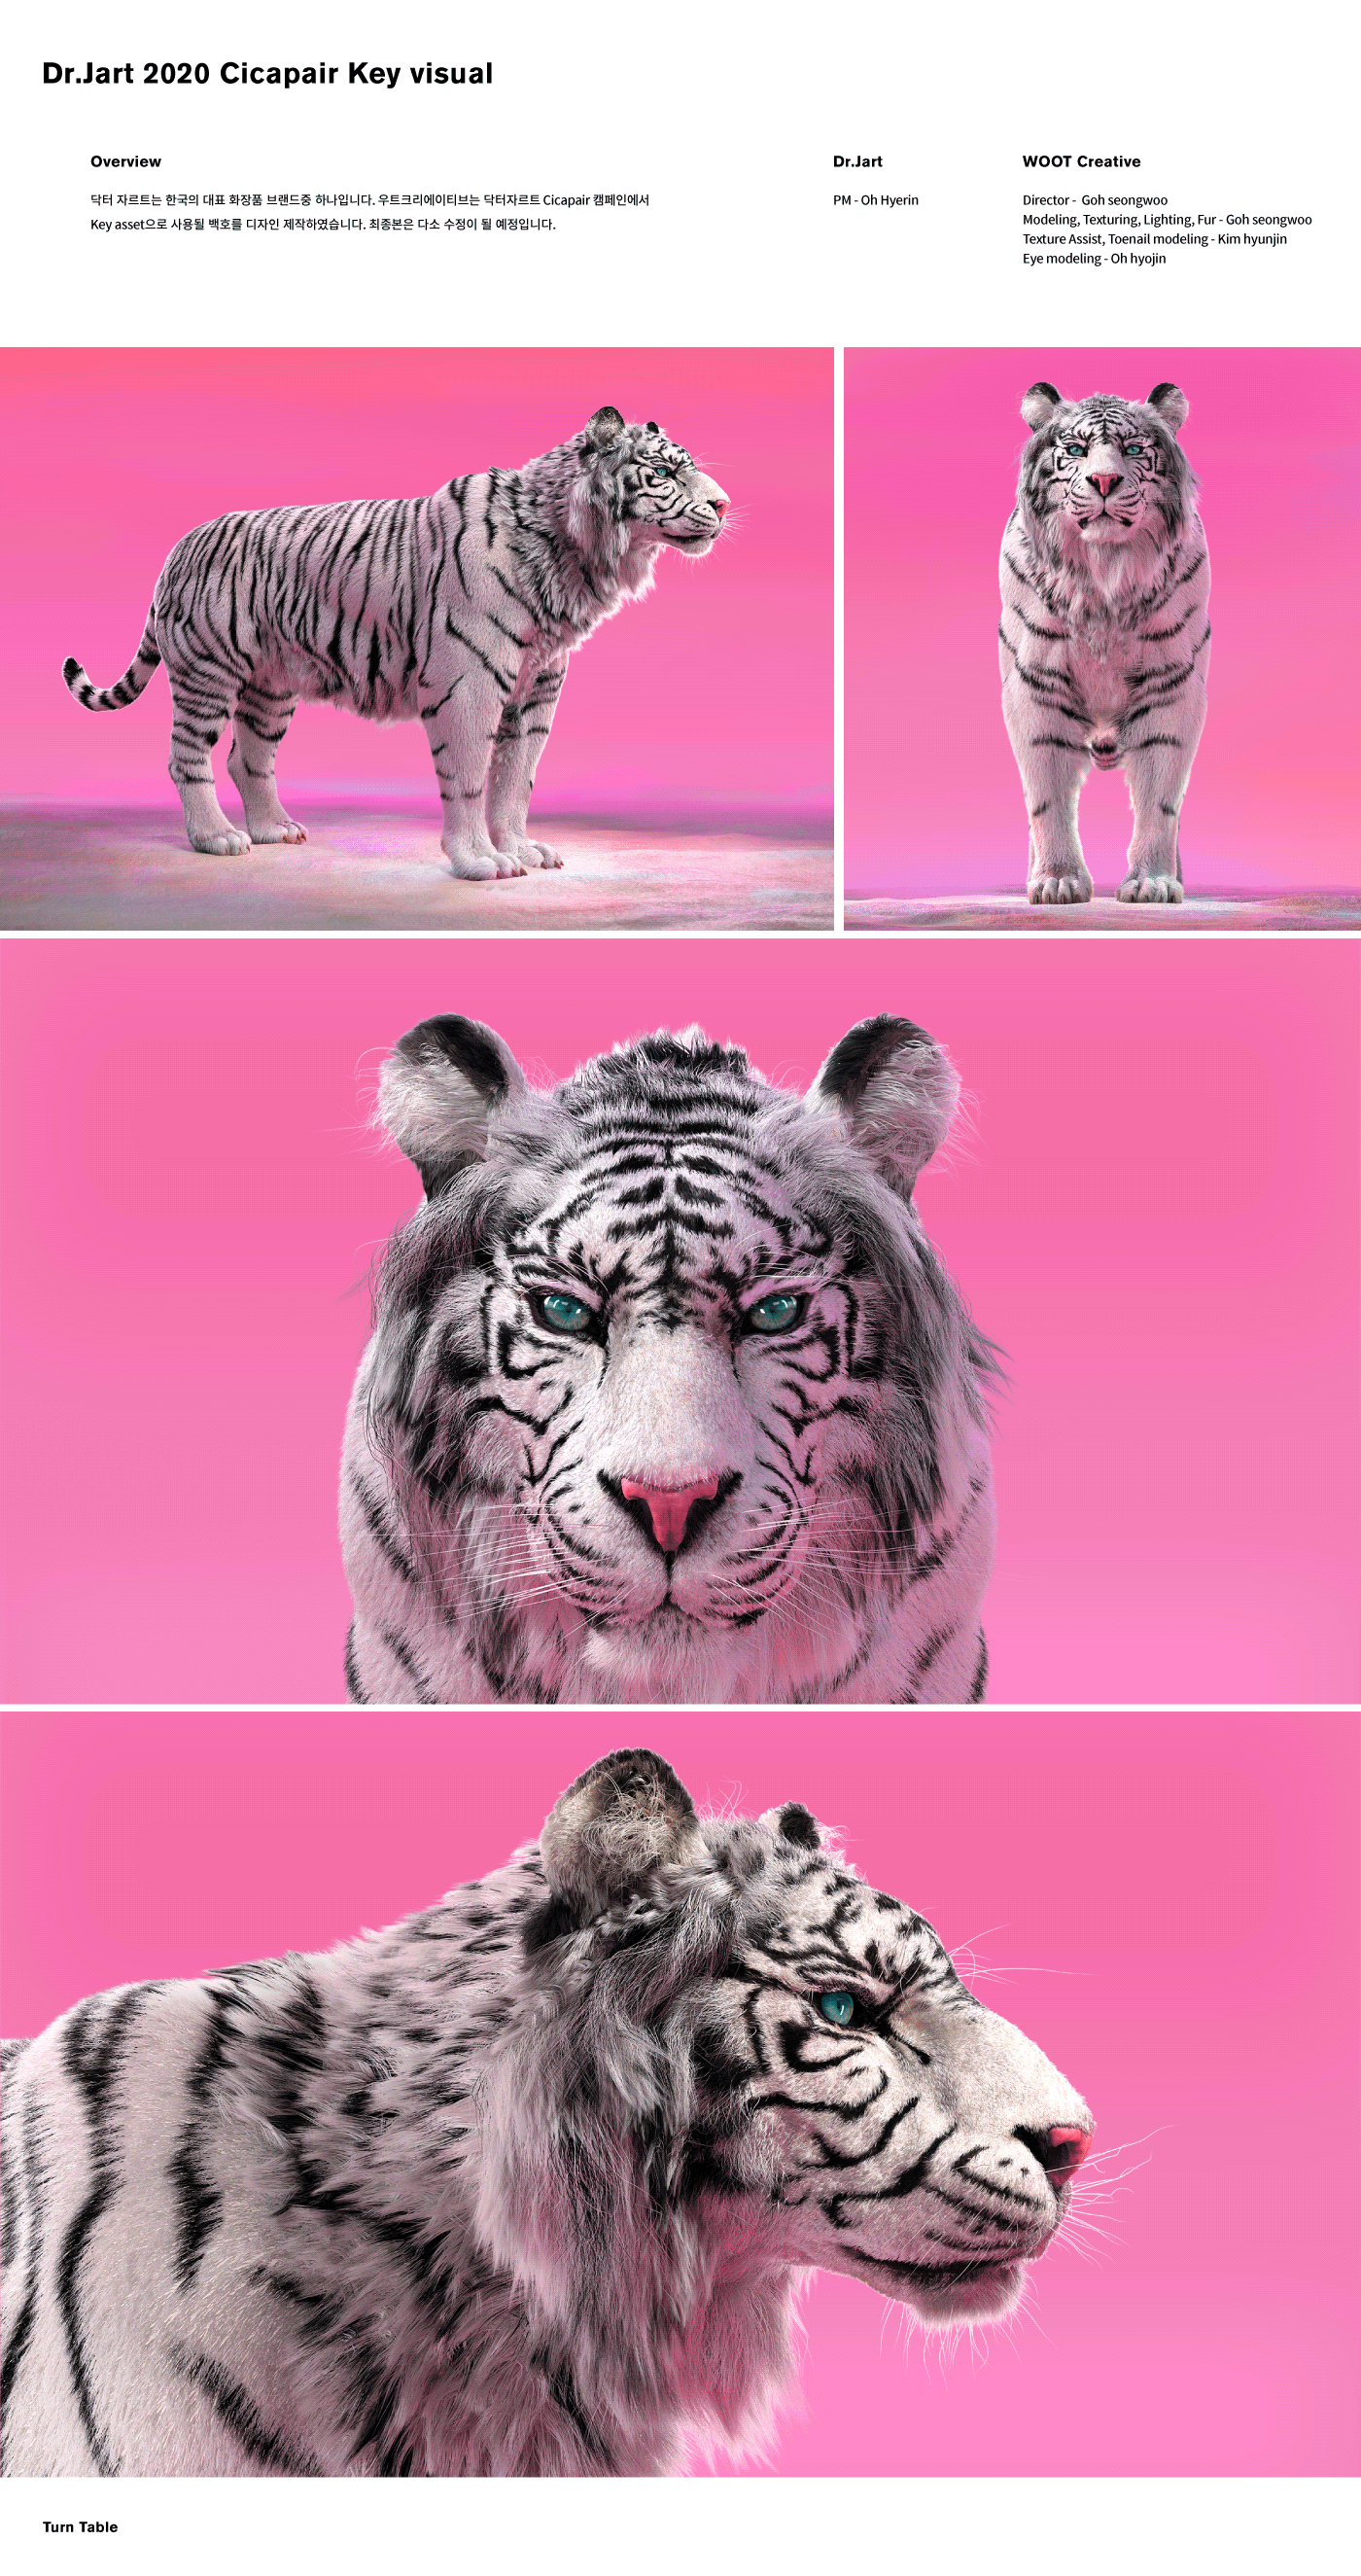 cicapair Cosmetic creature Dr.jart modeling tigher white tiger